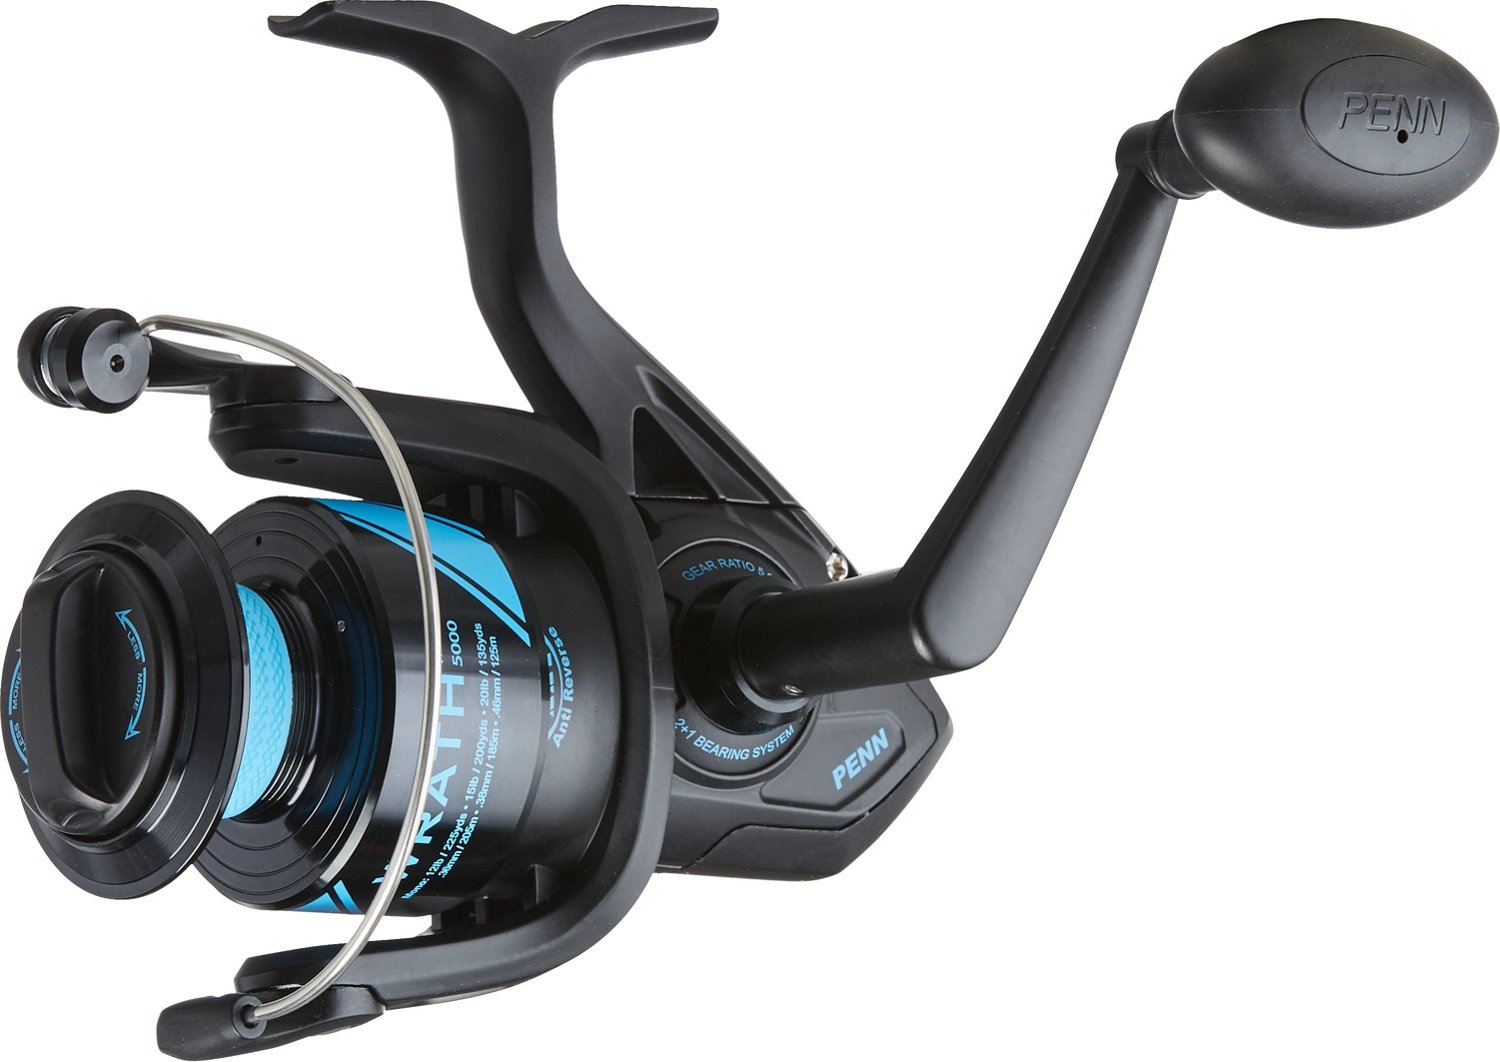 PENN Wrath Spinning Reel  Free Shipping at Academy